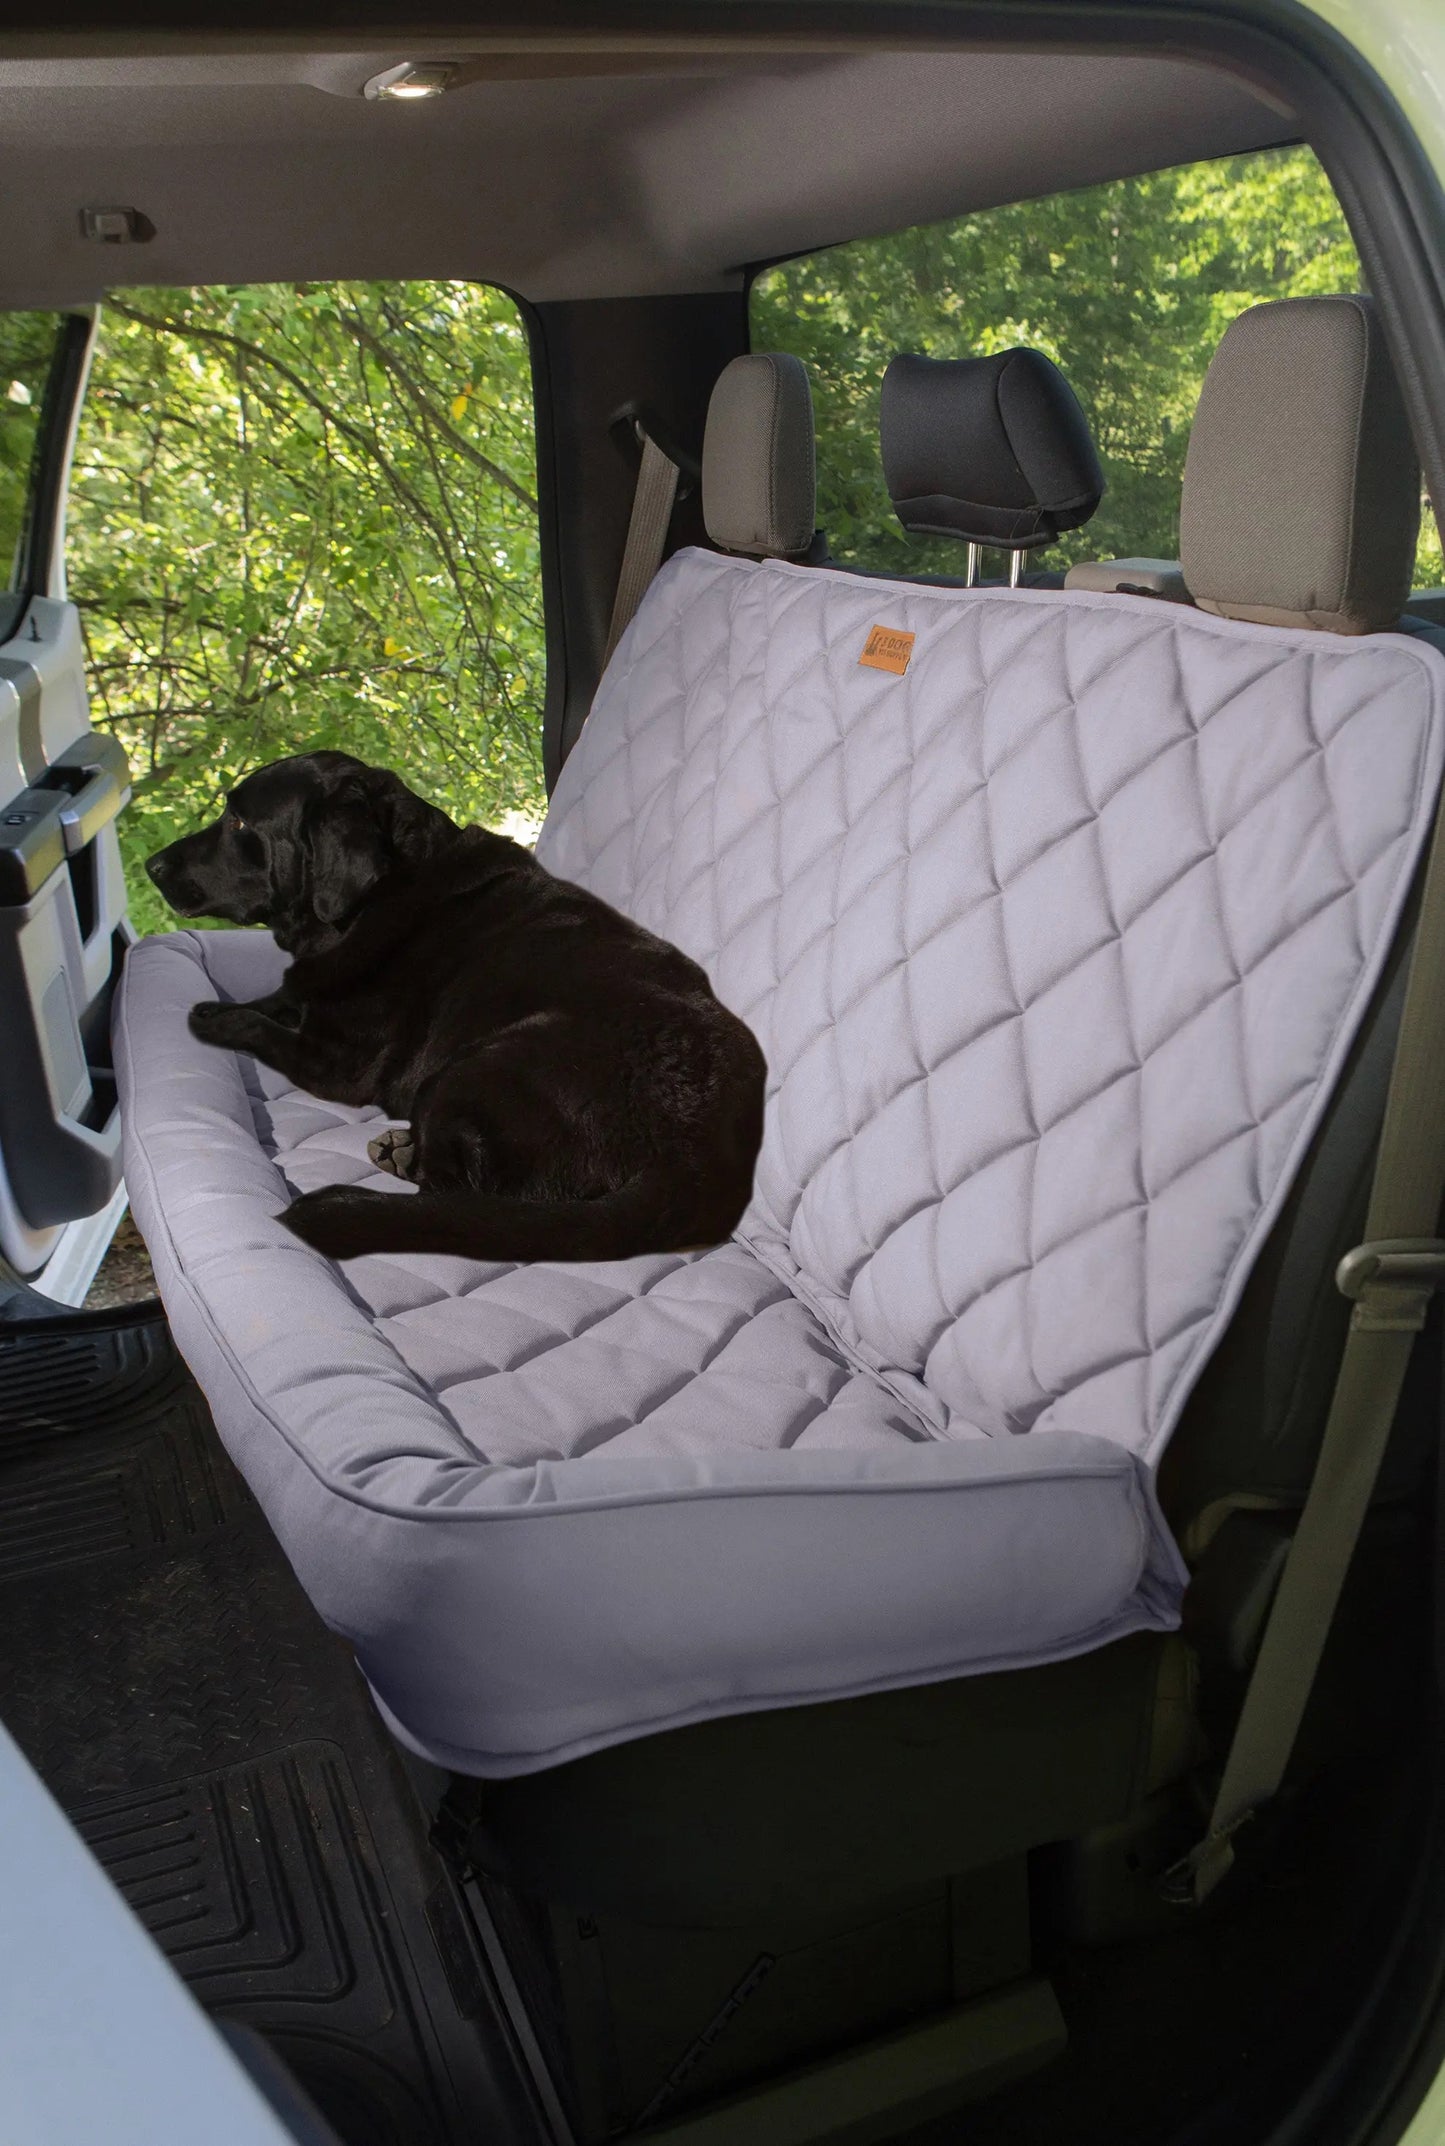 Crew Cab Truck sized Back Seat Protector with Headrest